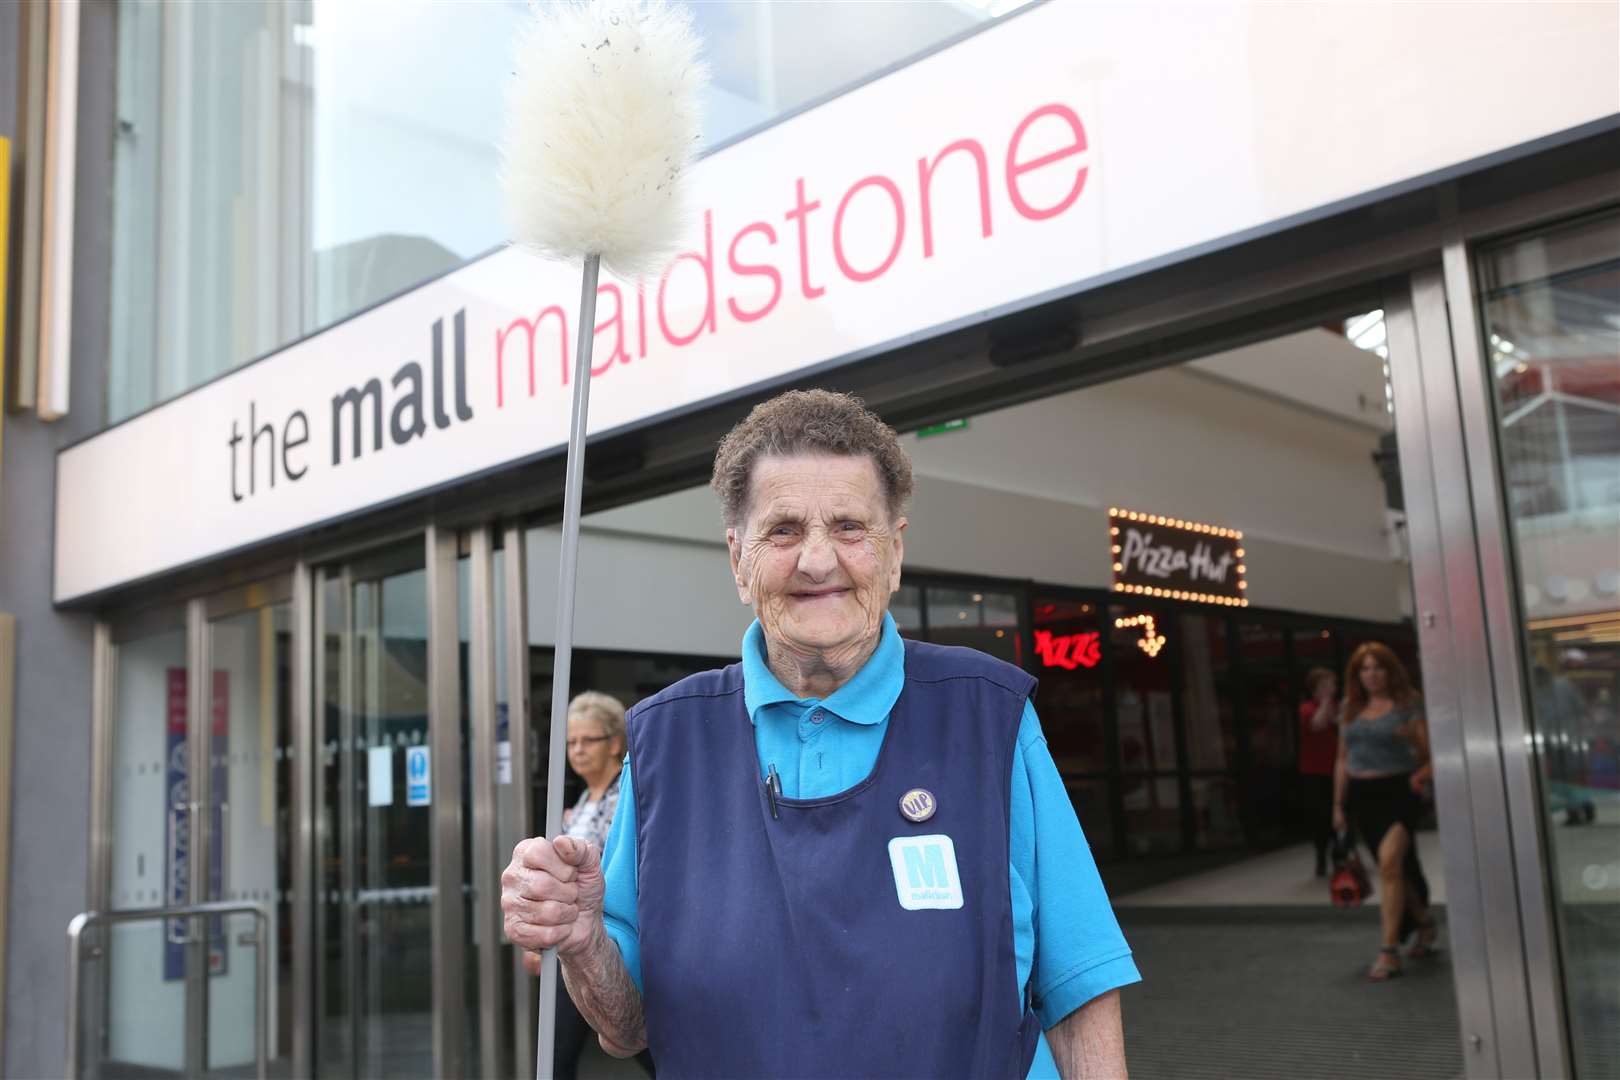 Marjorie is still working at The Mall with duster in hand